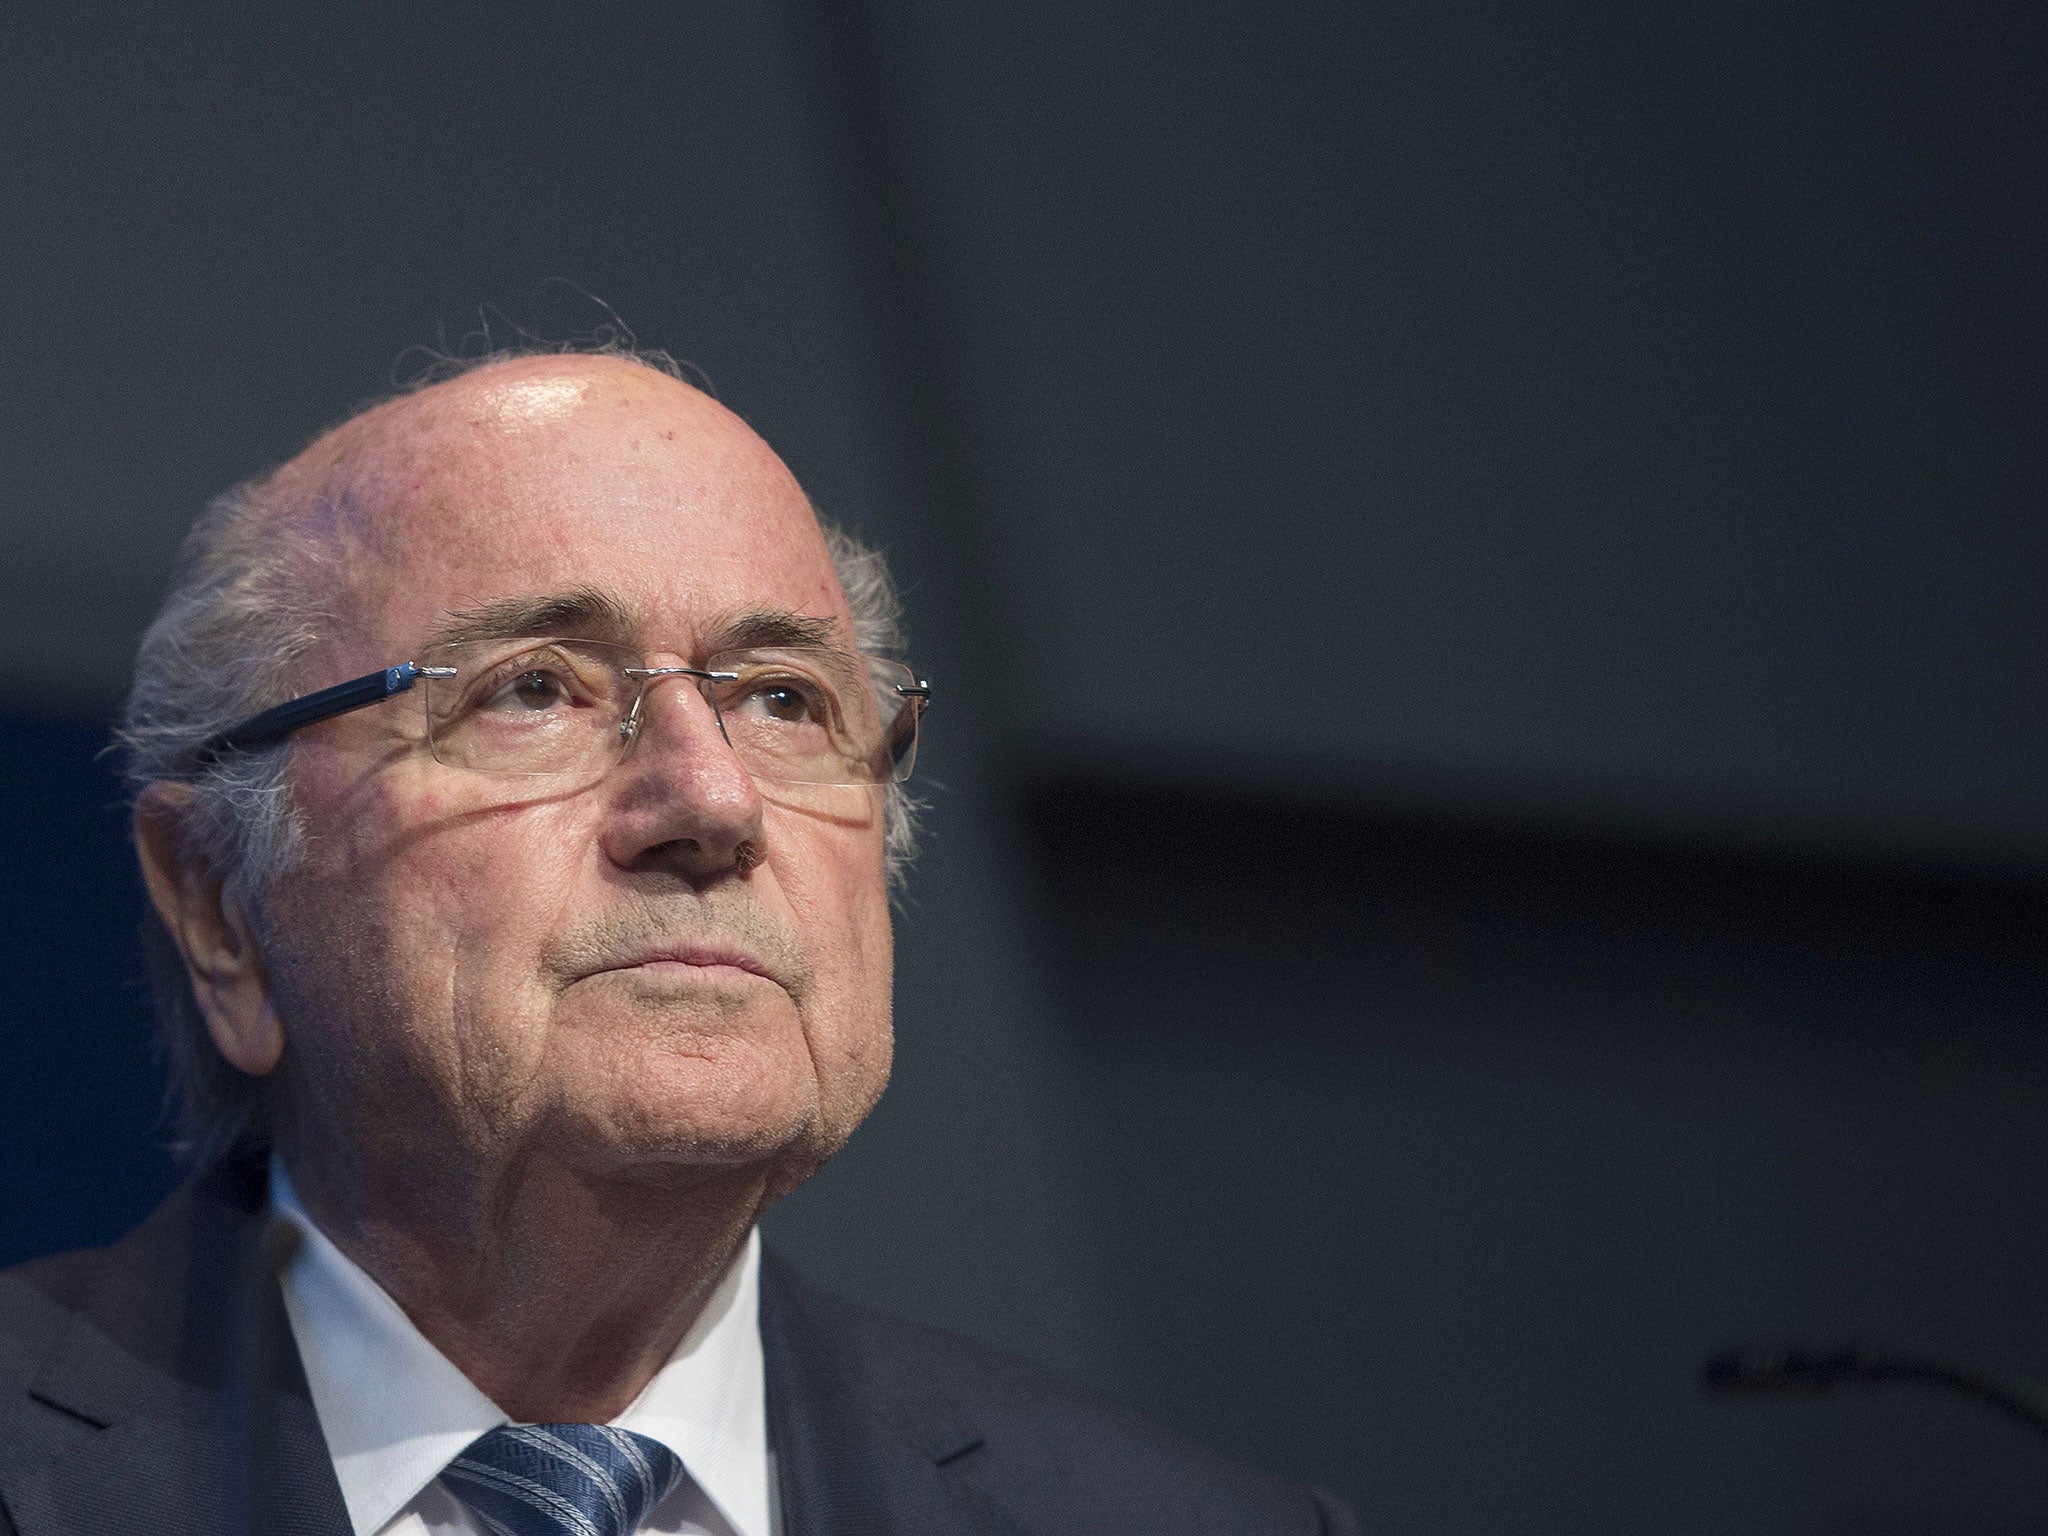 Blatter was president of Fifa between 1998 and 2015